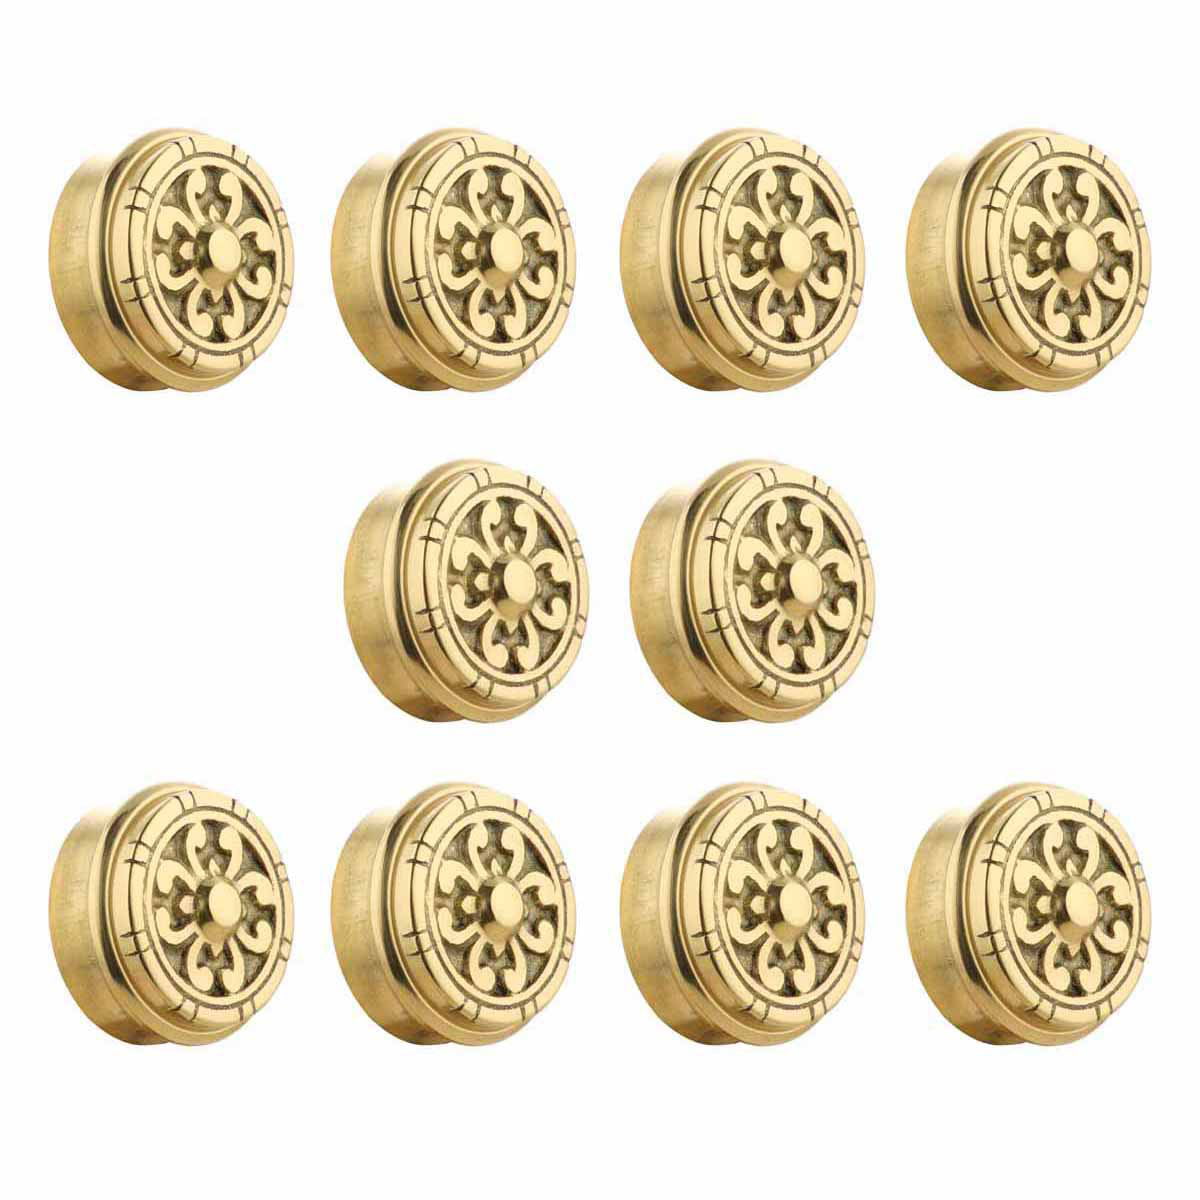 RSF Brass Decorative End P 2 Fits 2 inch Polished Solid Brass Fits 2 in 